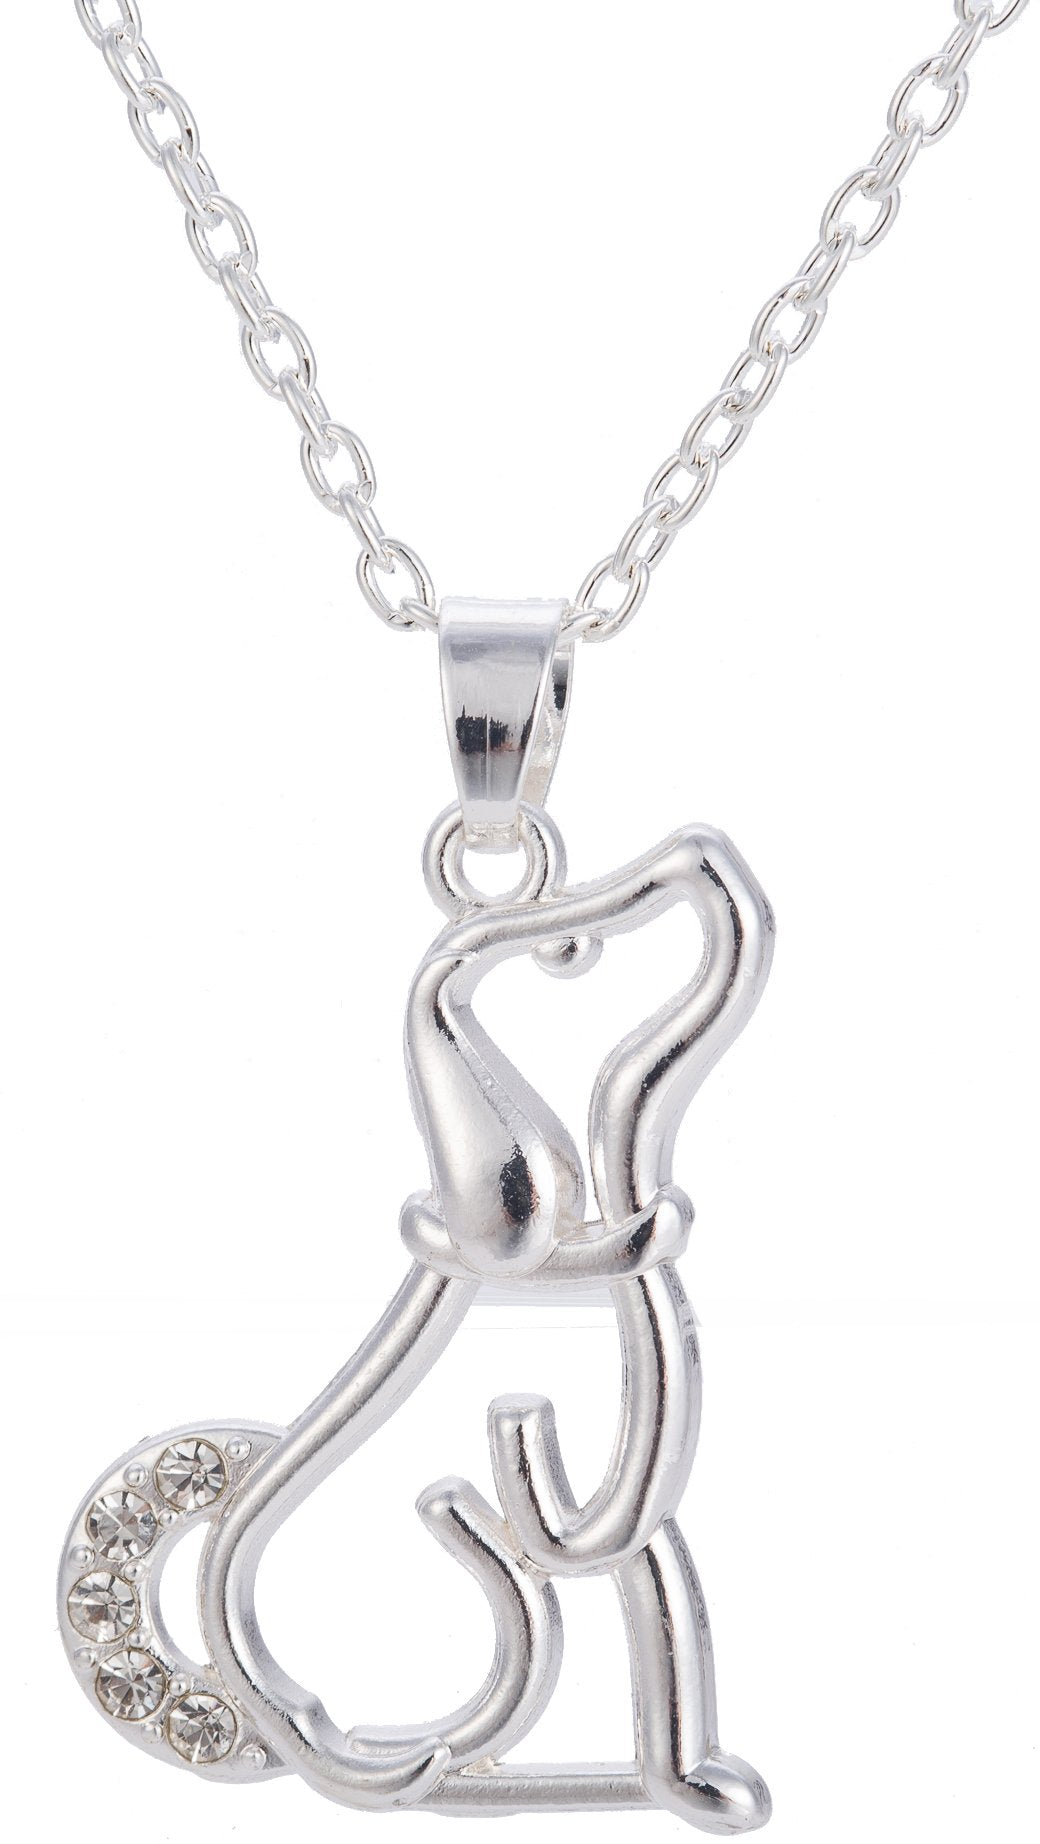 Lovely Silver Crystal Sitting Dog Puppy Pendant Necklace for Men Women Girls Boys Animal Jewelry